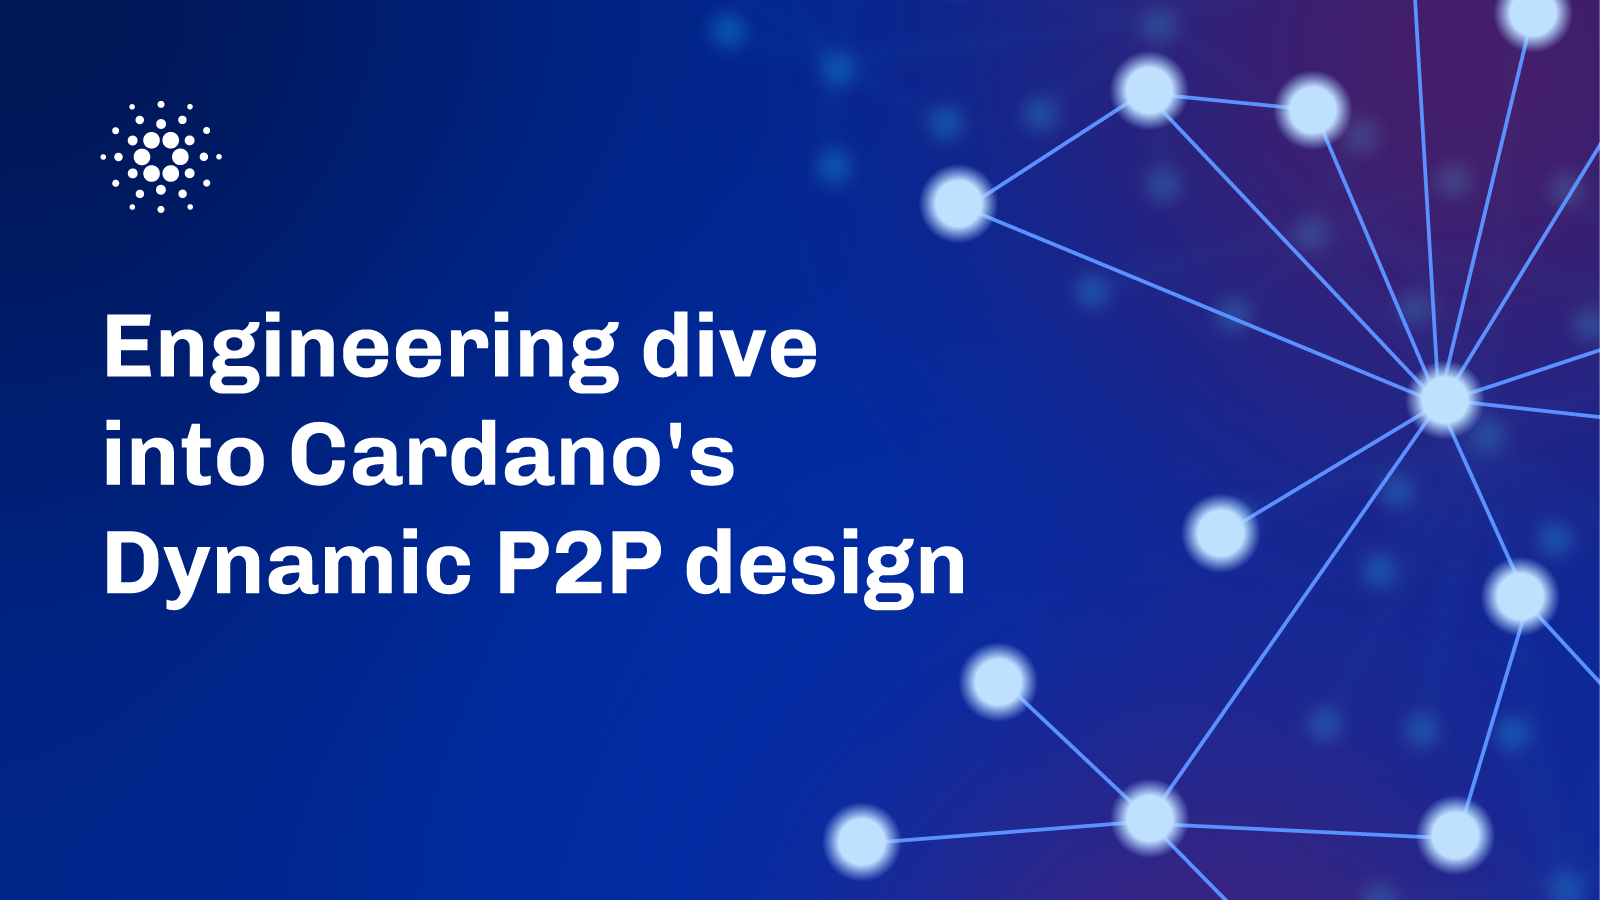 Engineering dive into Cardano's Dynamic P2P design